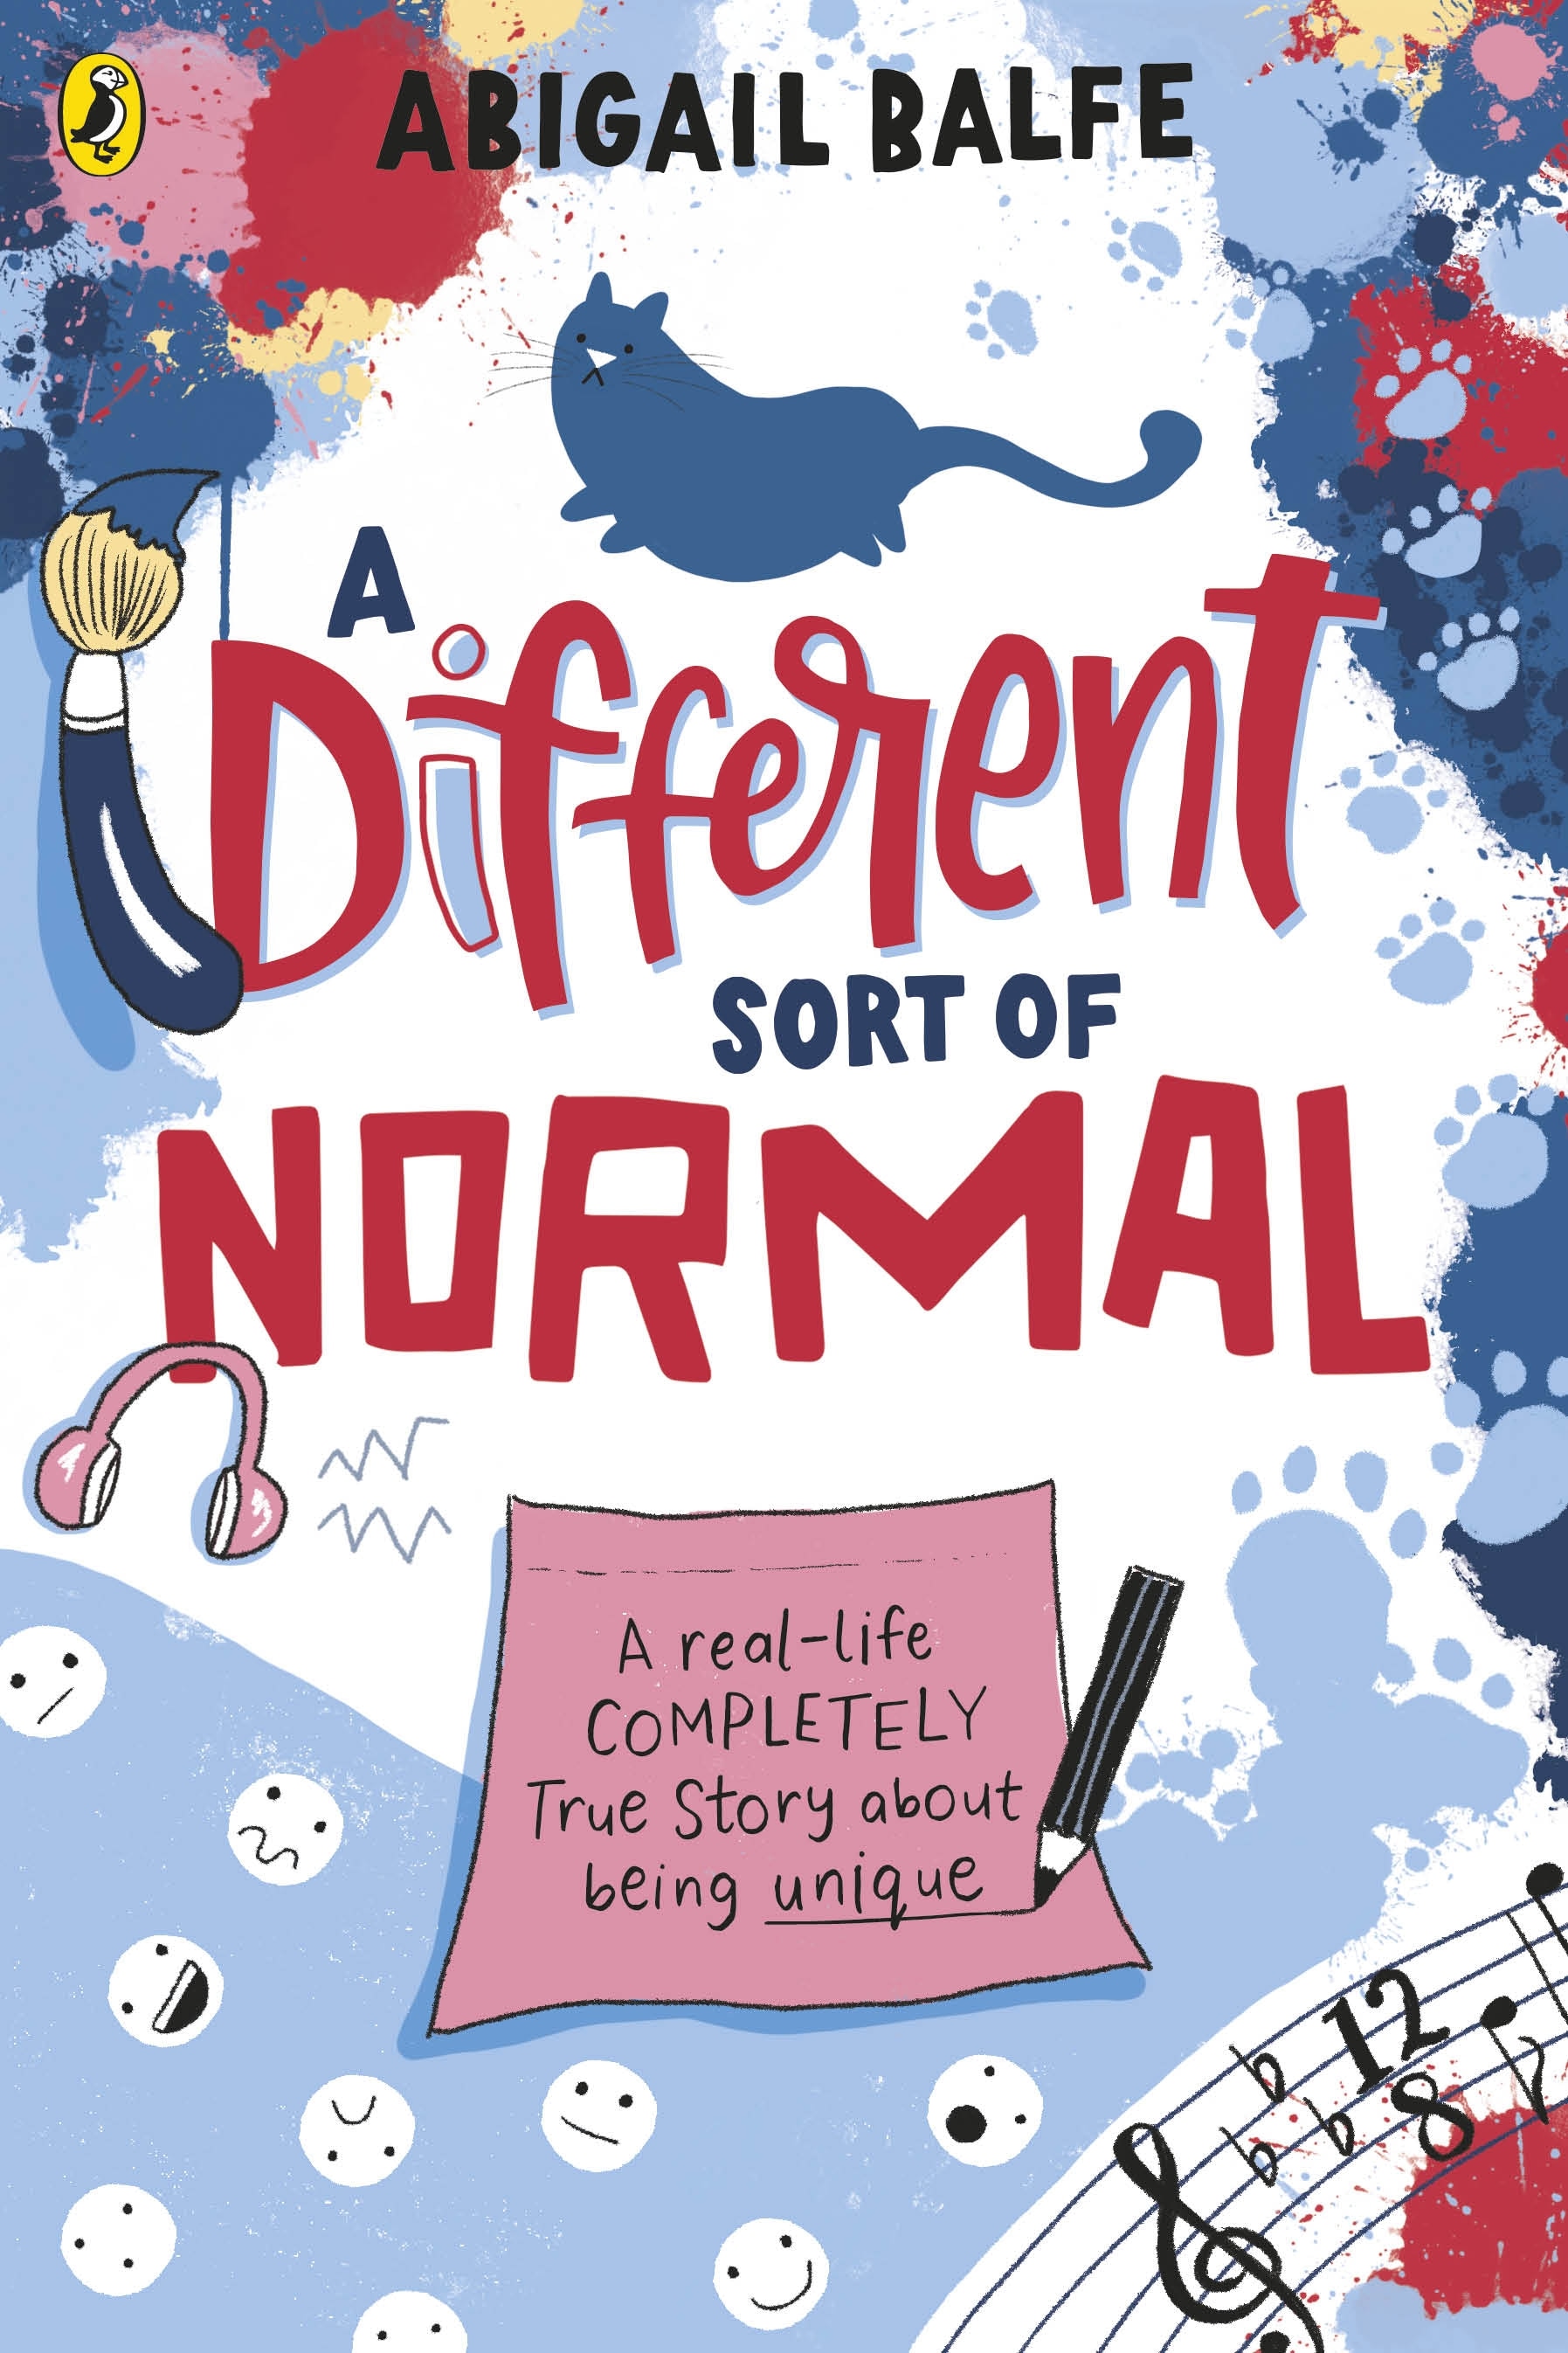 Book “A Different Sort of Normal” by Abigail Balfe — July 22, 2021